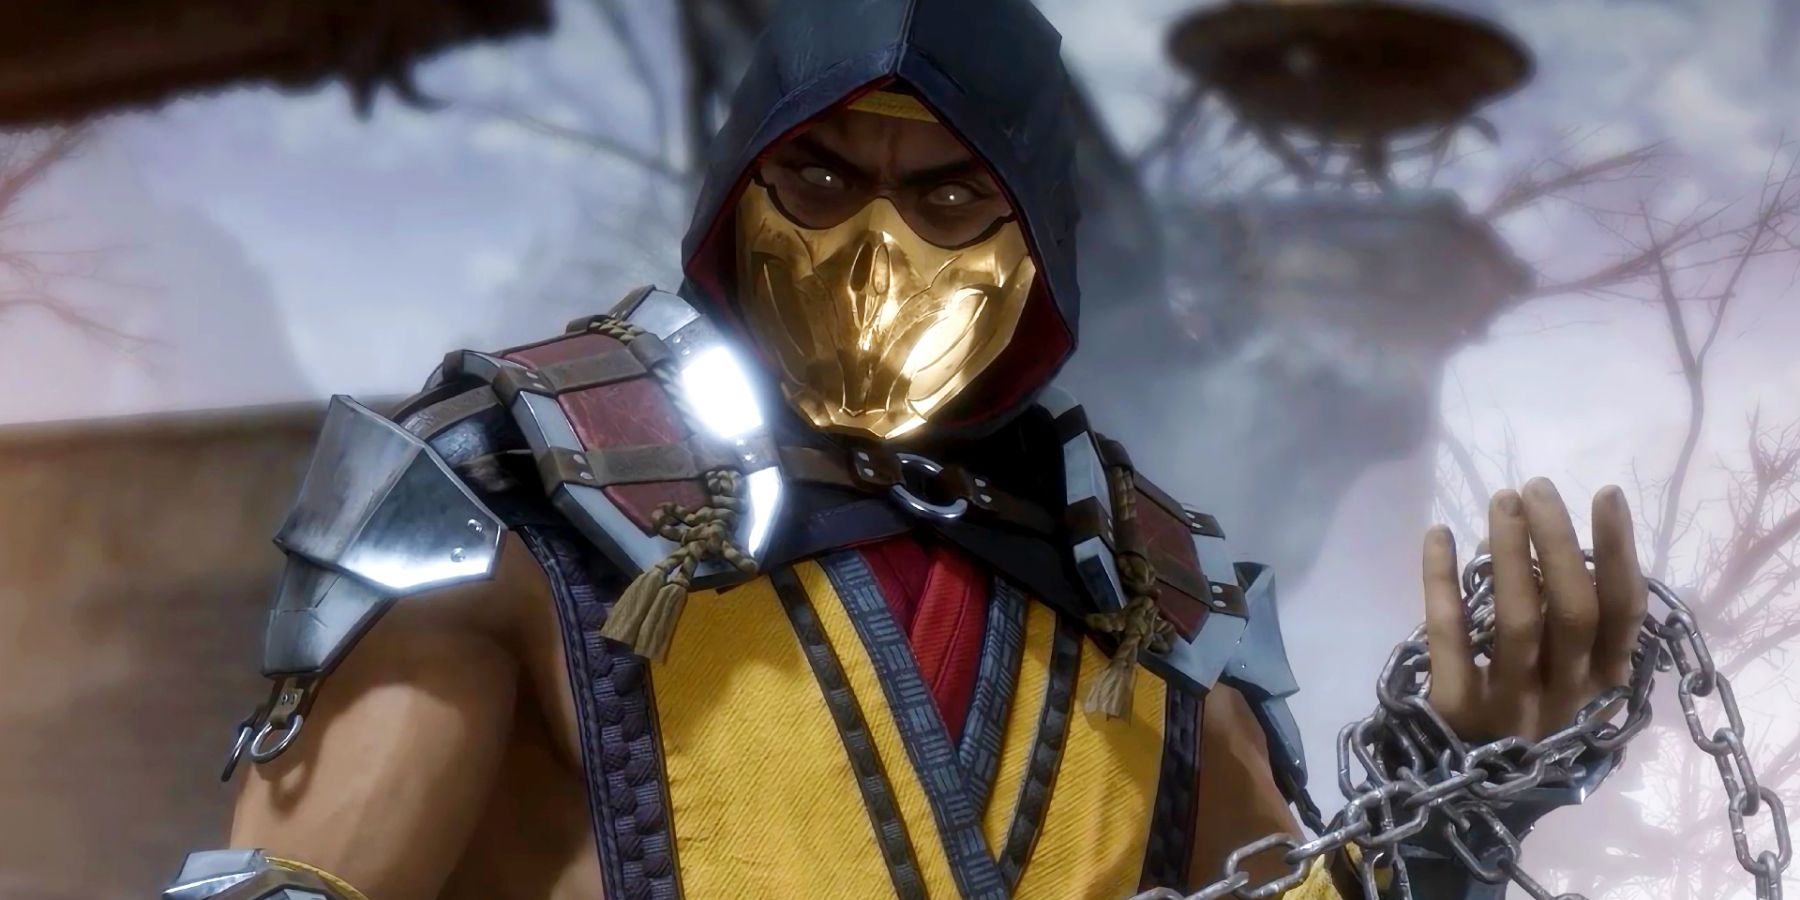 The scorpion in Mortal Kombat 11 has a chain wrapped around its arm.